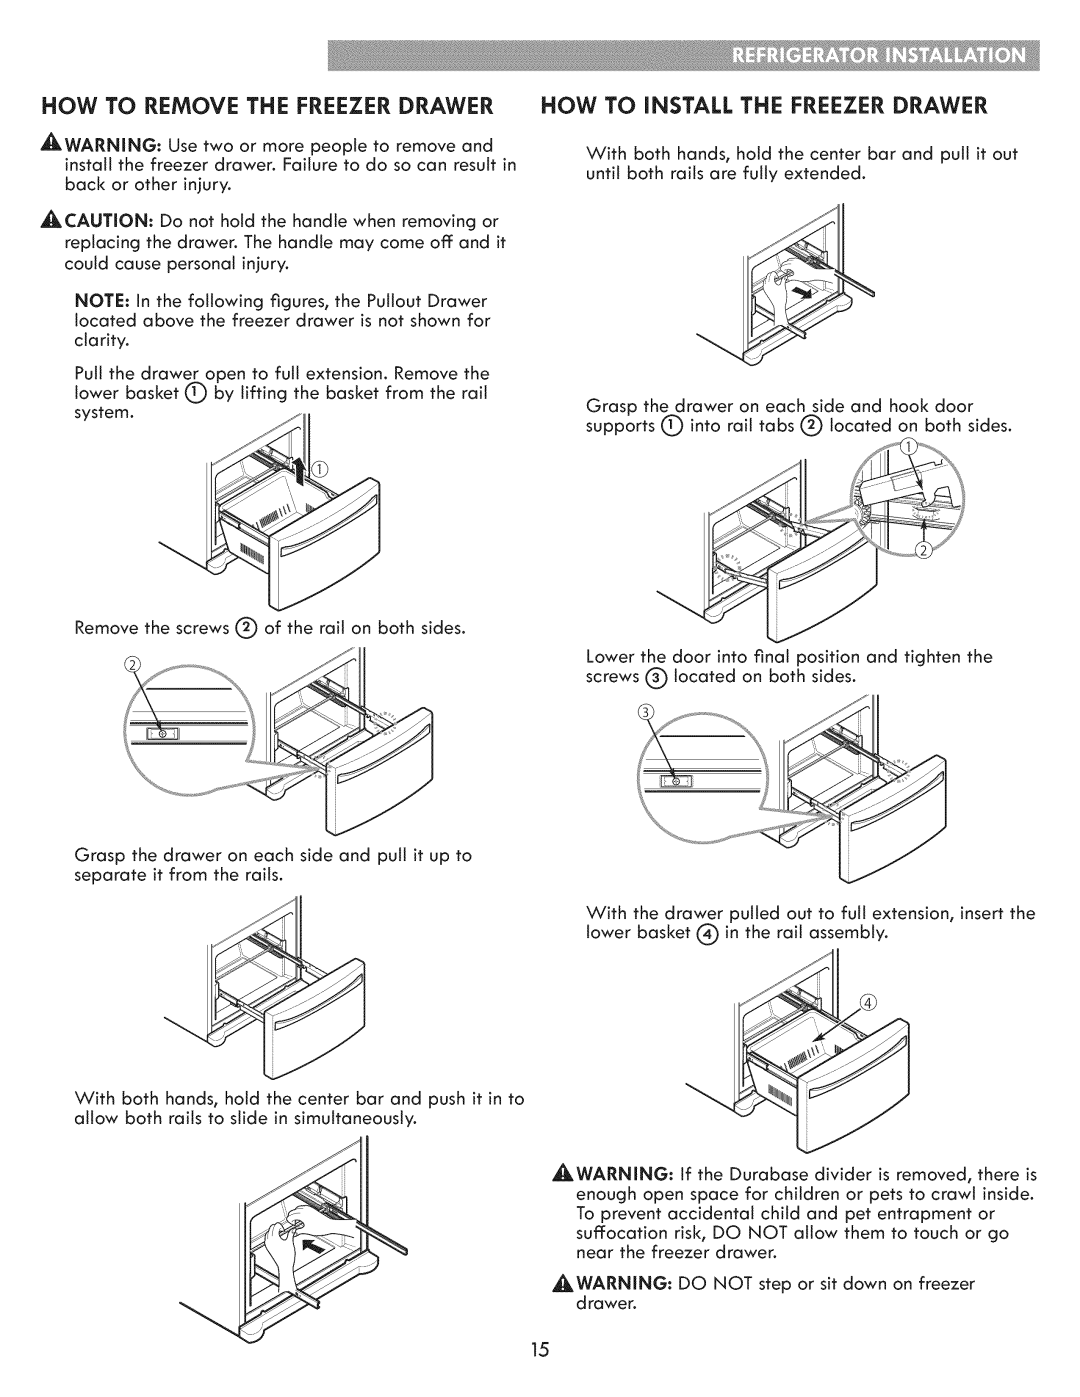 Kenmore 795.7103 manual How To Remove, How To Install The Freezer Drawer 